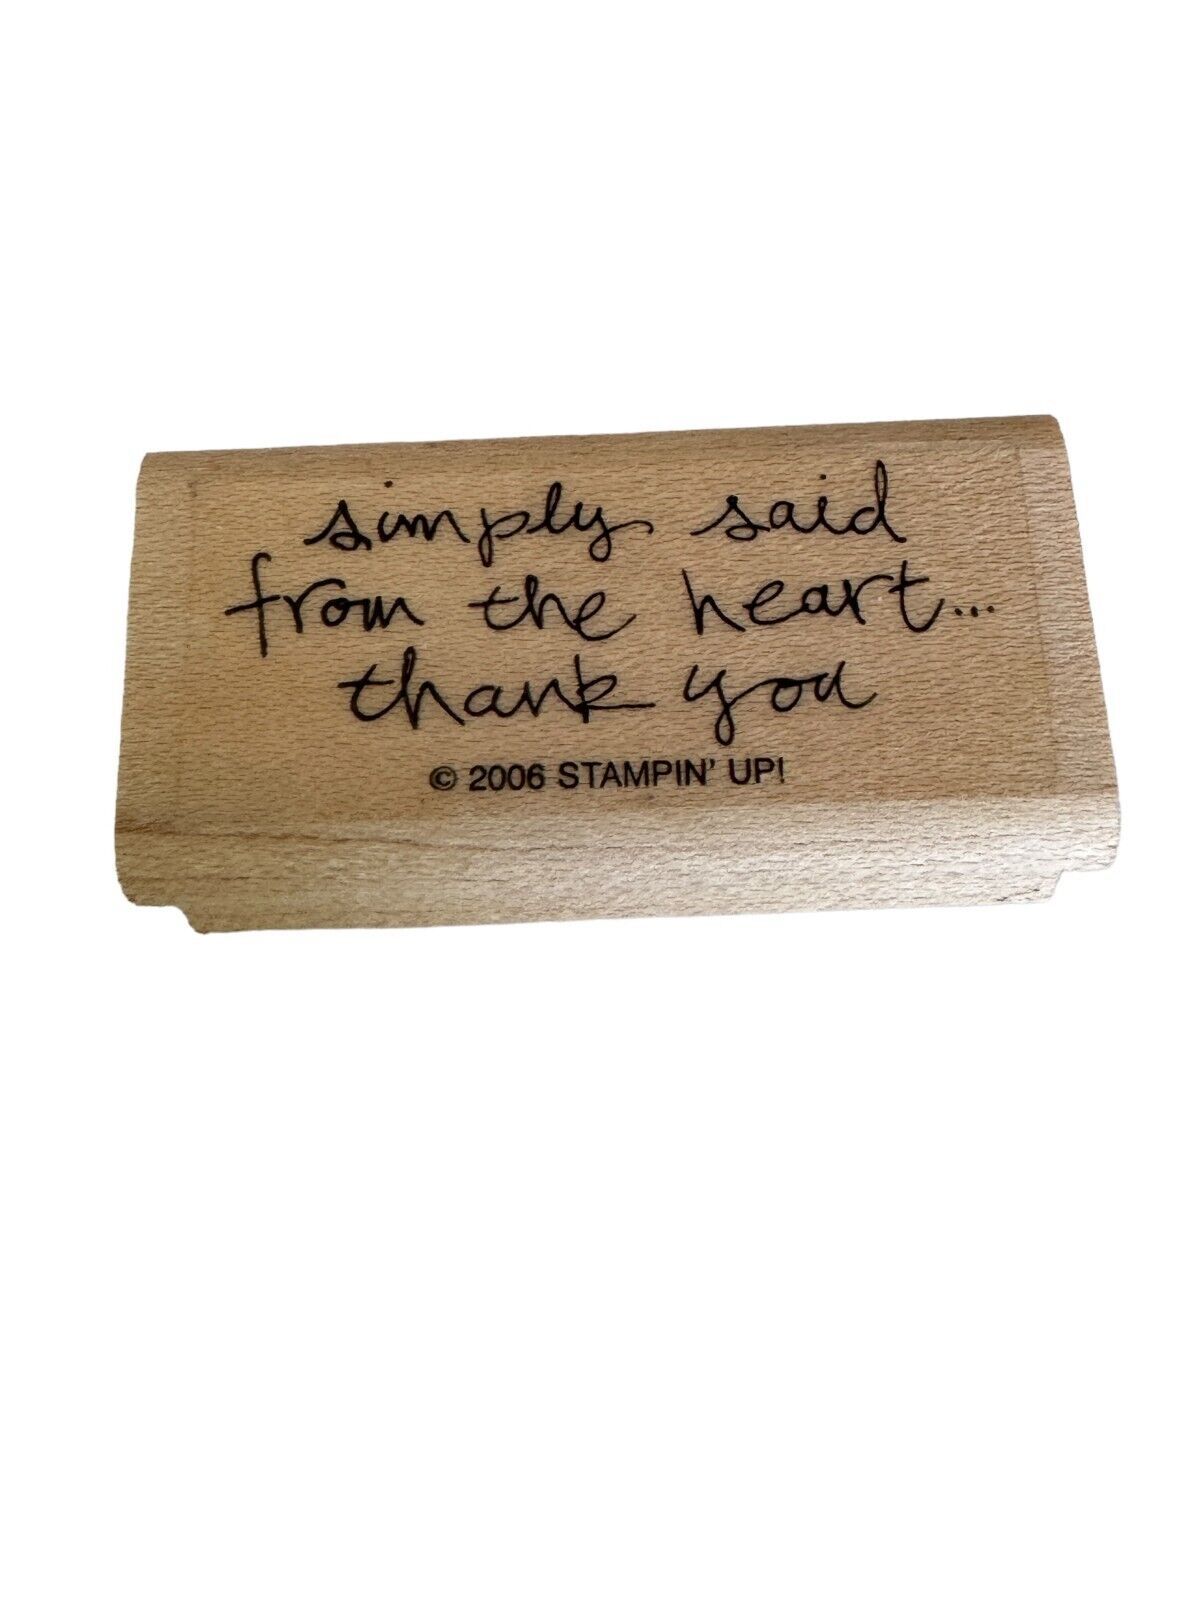 Stampin Up Rubber Stamp Simply Said From the Heart Thank You Card Sentiment - $4.99